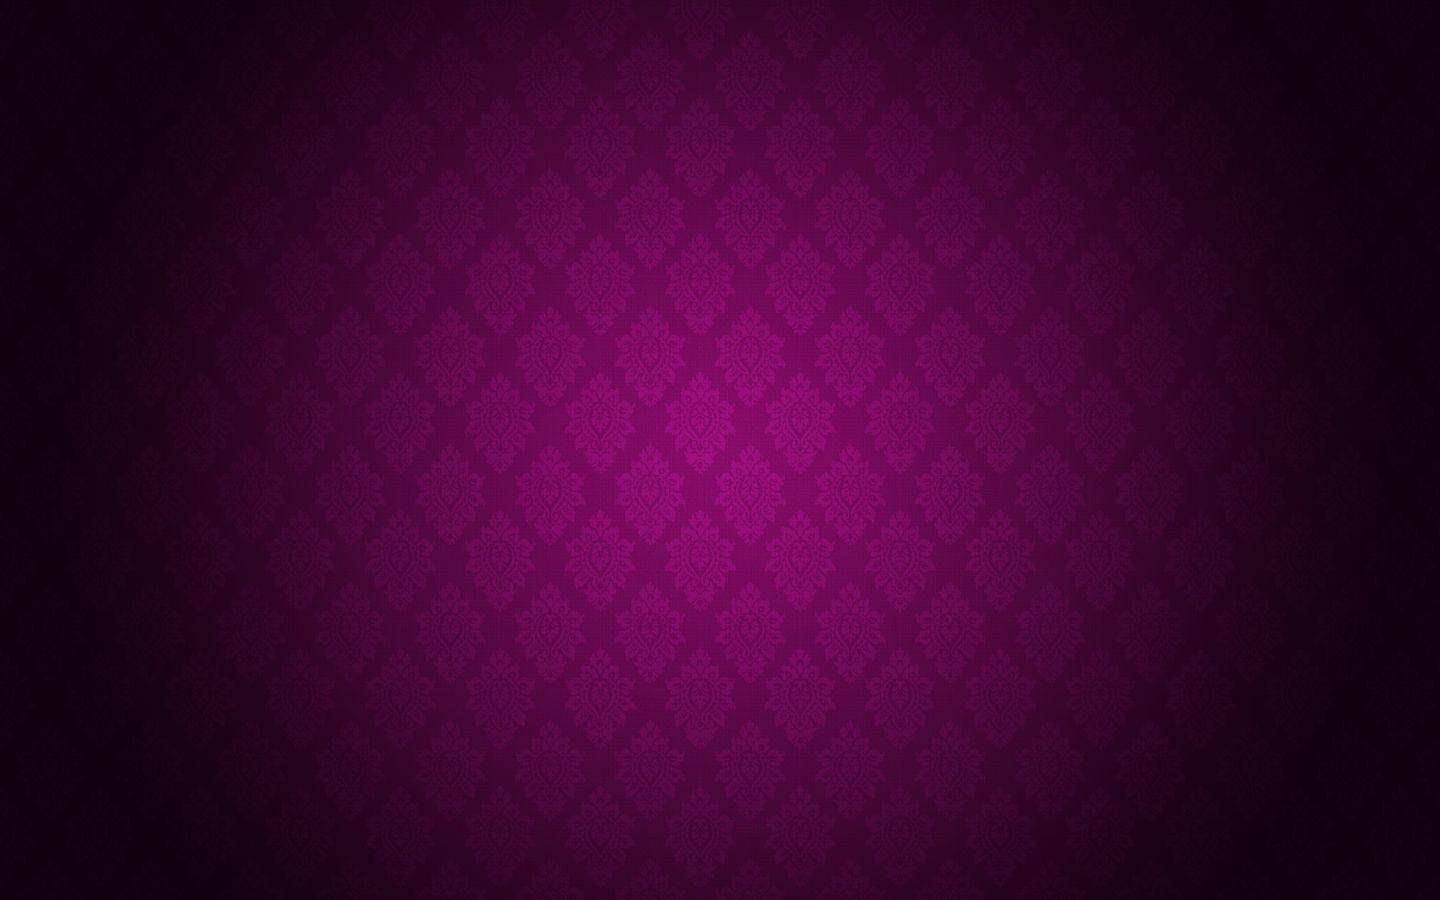 Pink And Purple Backgrounds